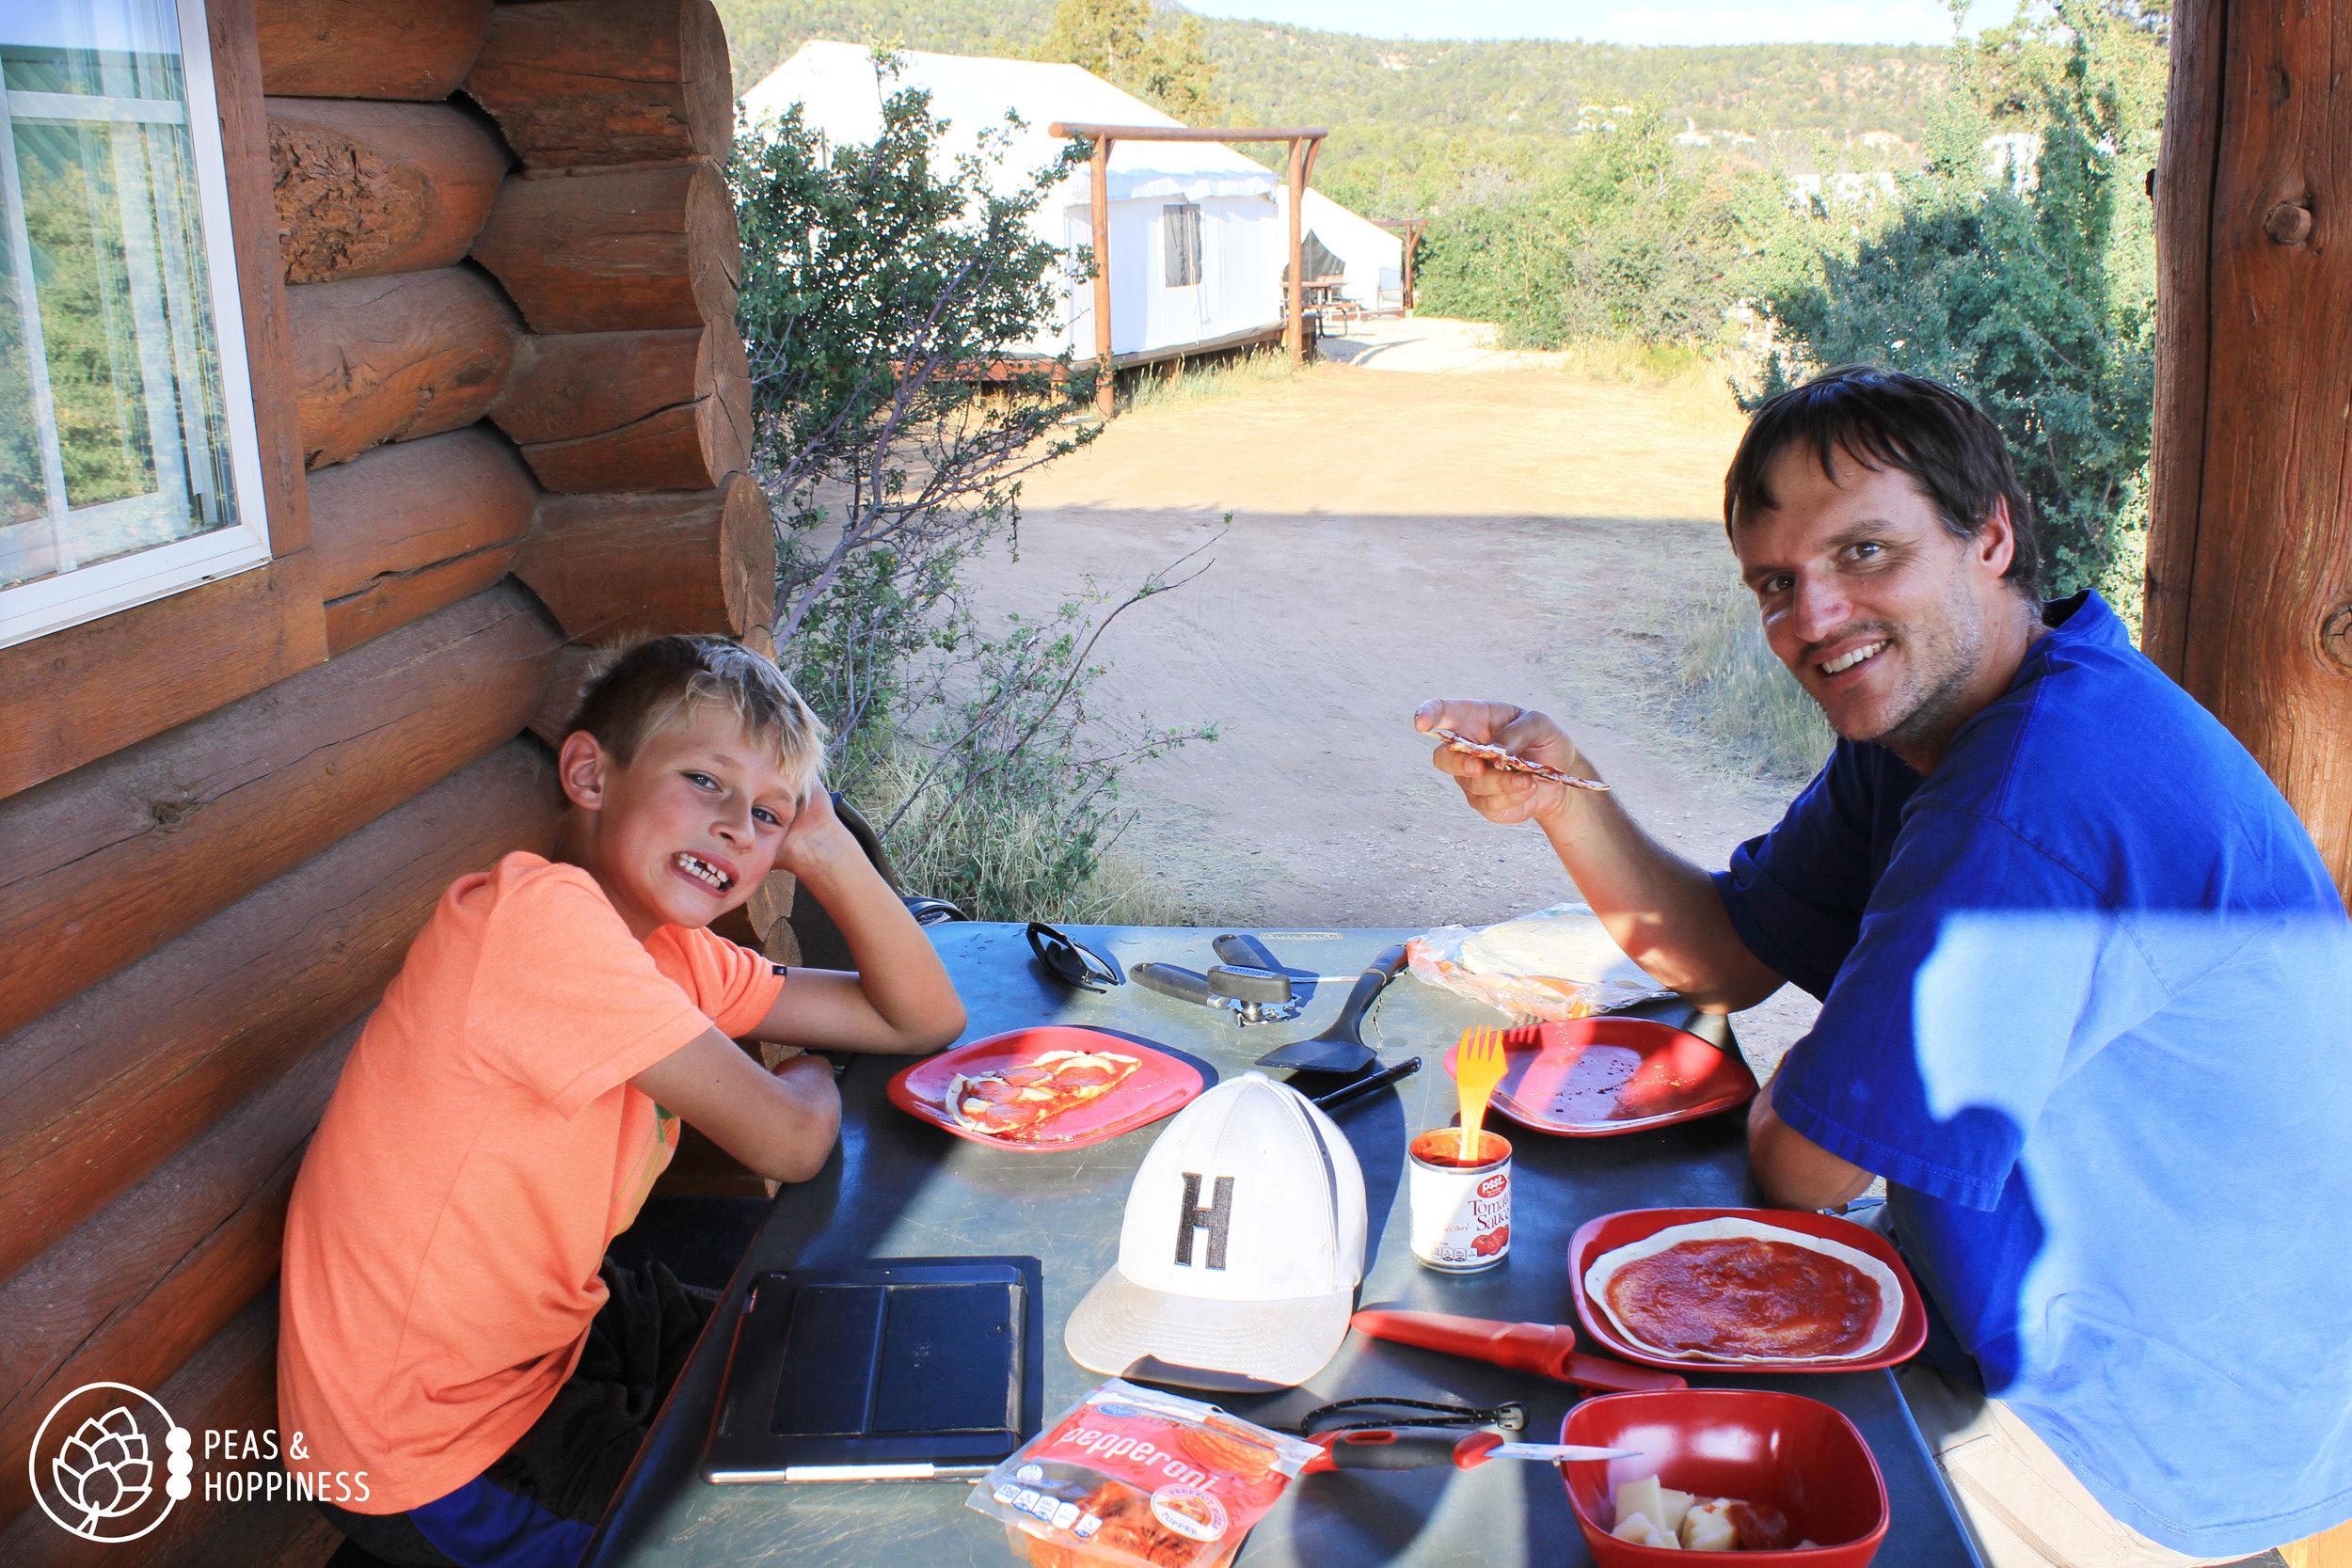 Back in "civilization" at our cabin near Zion, eating tortilla pizzas cooked over the fire. They are as tired as they look!